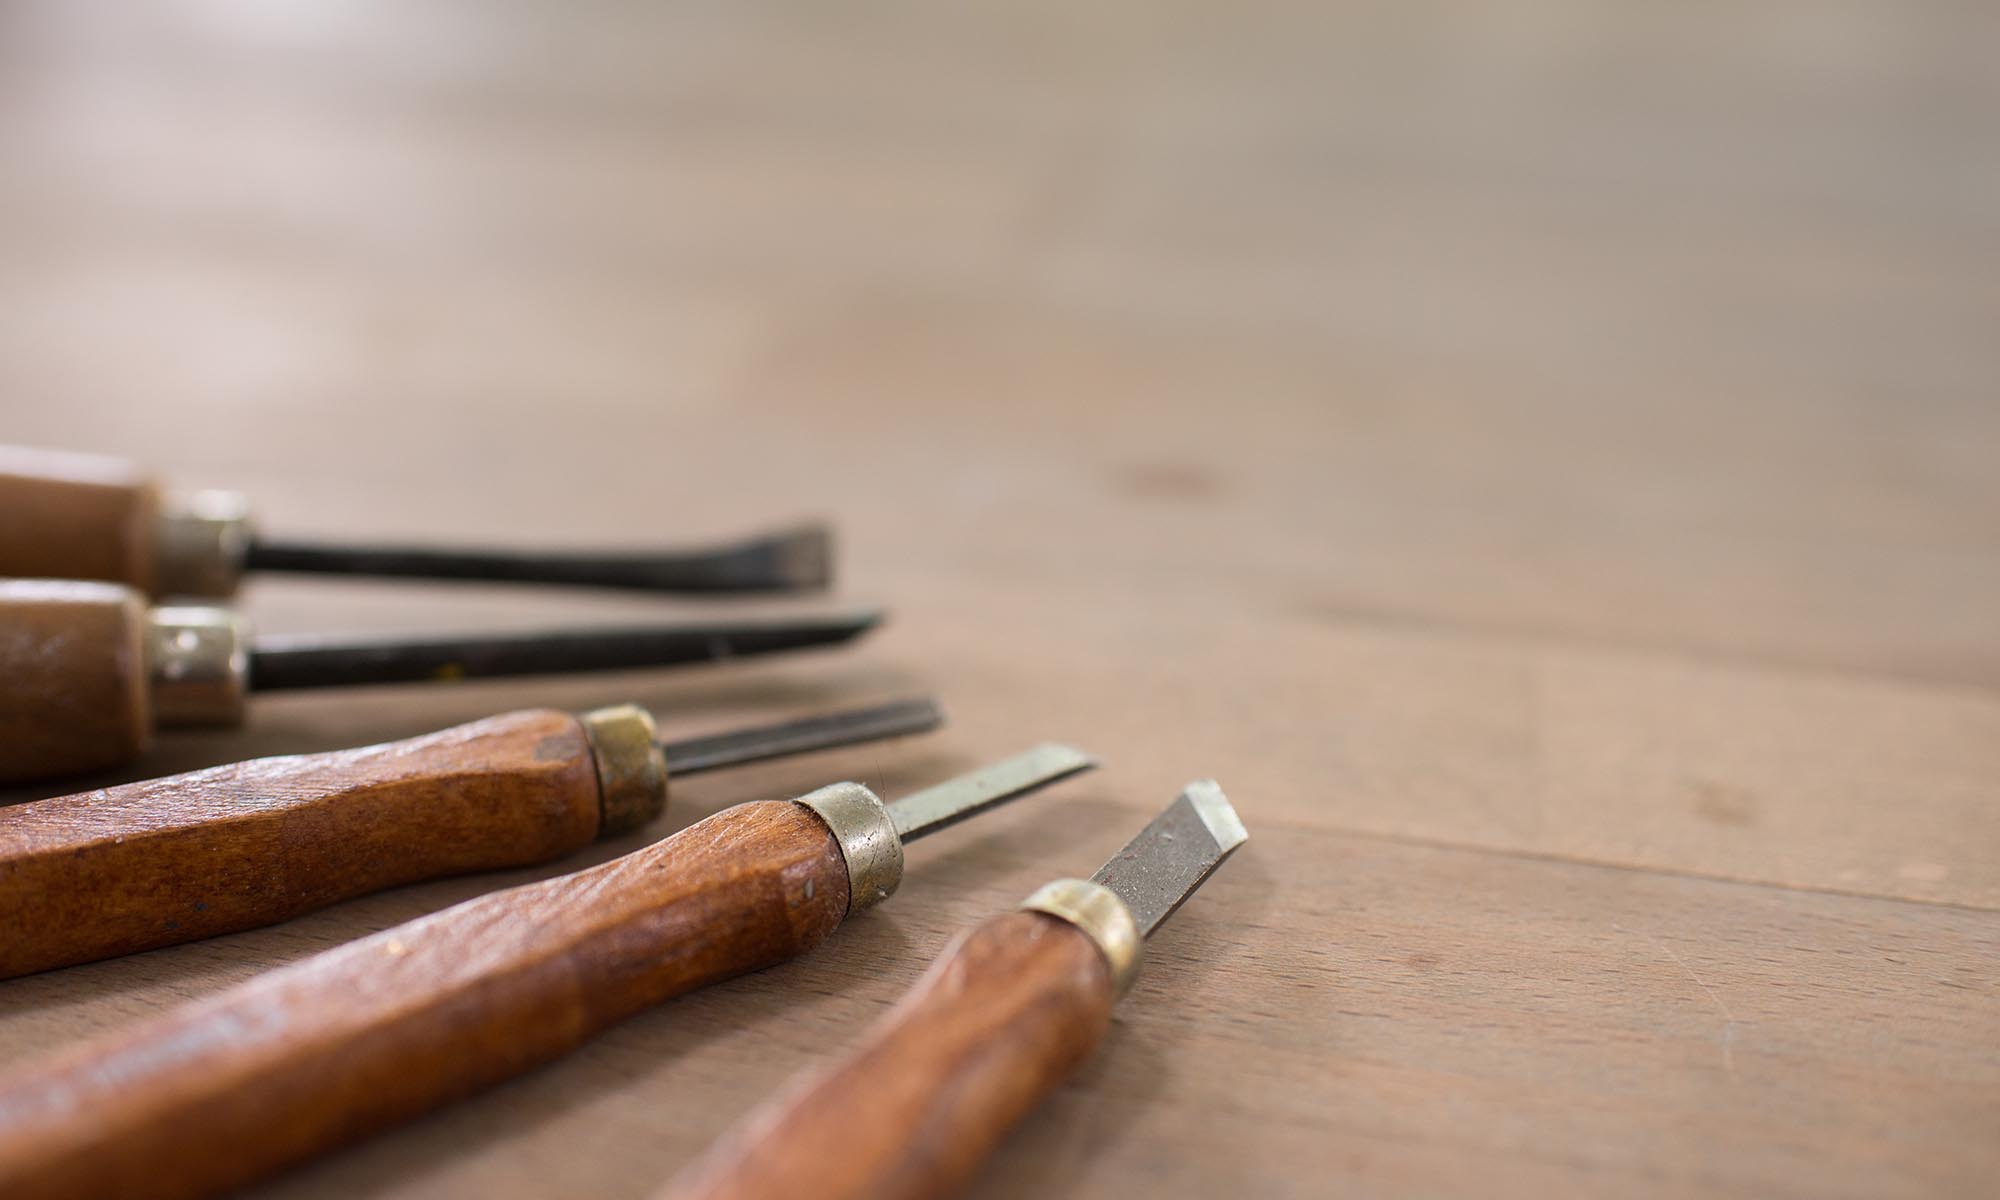 An image of wood carving tools on a table.